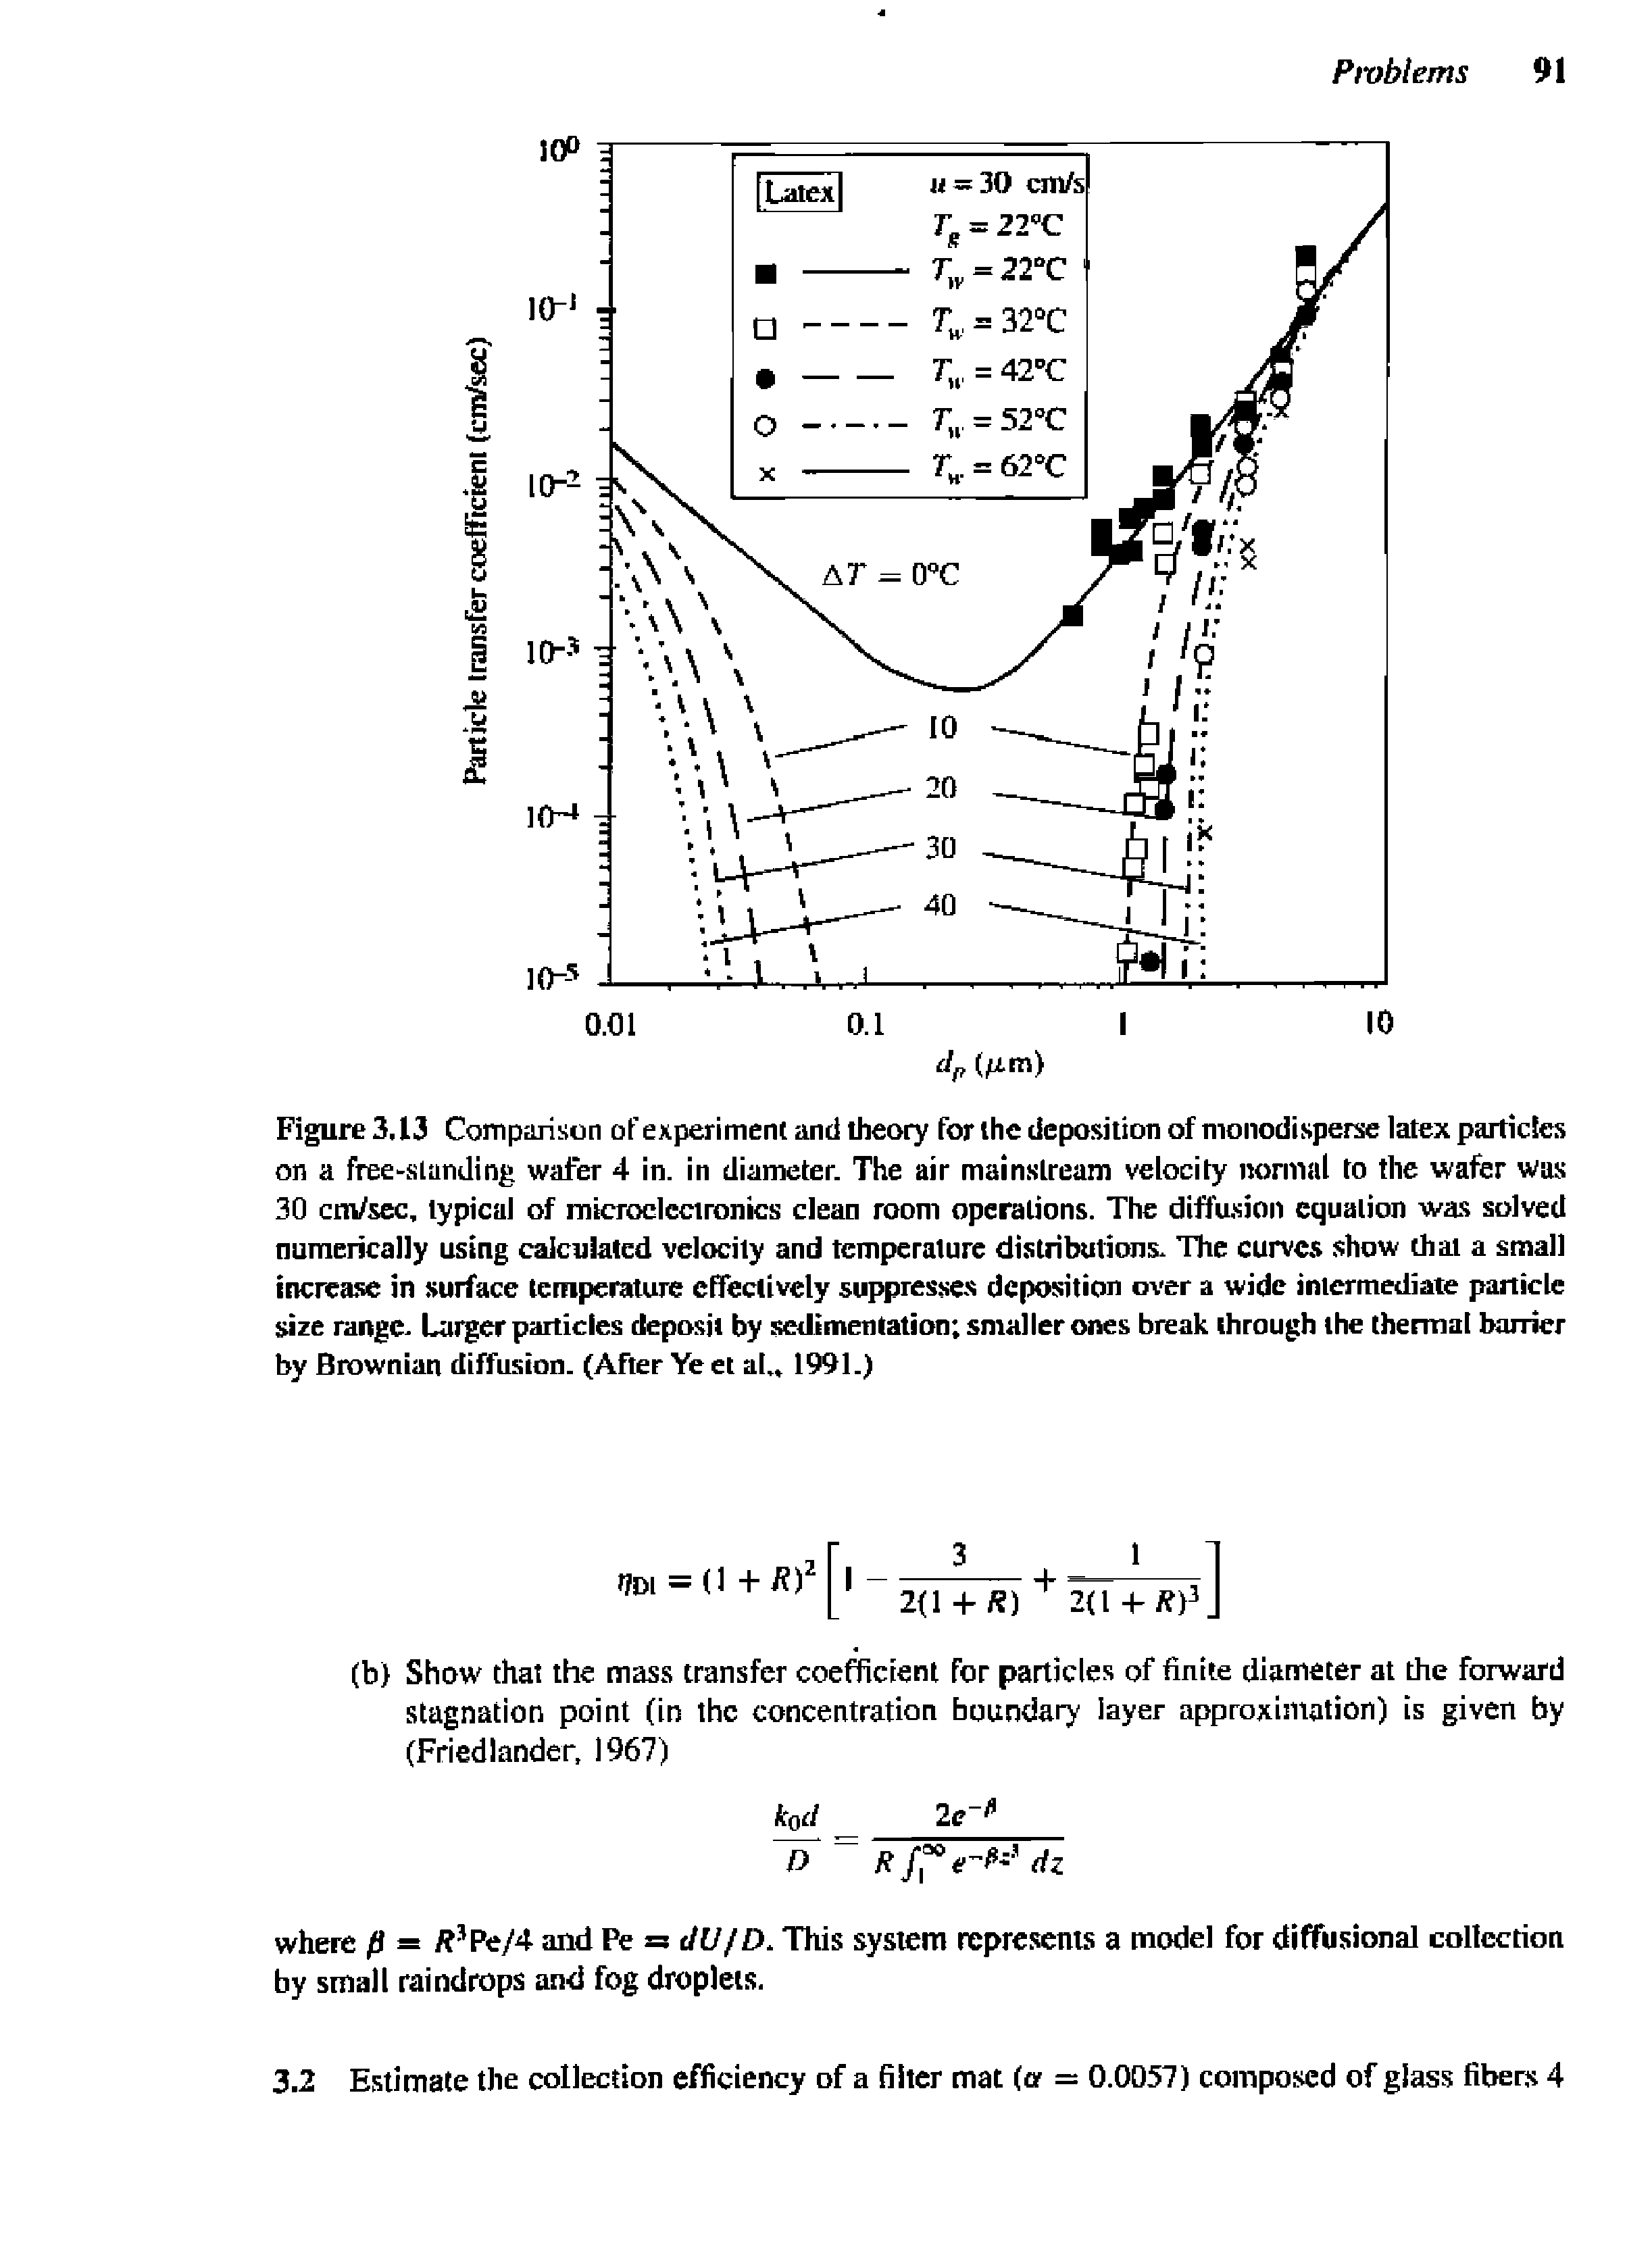 Figure 3.13 CompEirison of experiment and theory for the deposition of monodisperse latex particles on a free-slanding wafer 4 in. in diameter. The air mainstream velocity normal to the wafer was 30 cm/sec, typical of microelectronics clean room operations. The diffu-sion equation wa.s solved numerically using calculated velocity and temperature distributions. The curves show that a small increase in surface temperature eHeelivcly suppresses deposition over a wide intermediate particle size range. Larger particles deposit by sedimentation smaller ones break through the thermal barrier by Brownian diffusion. (After Ye et aL, 1991.)...